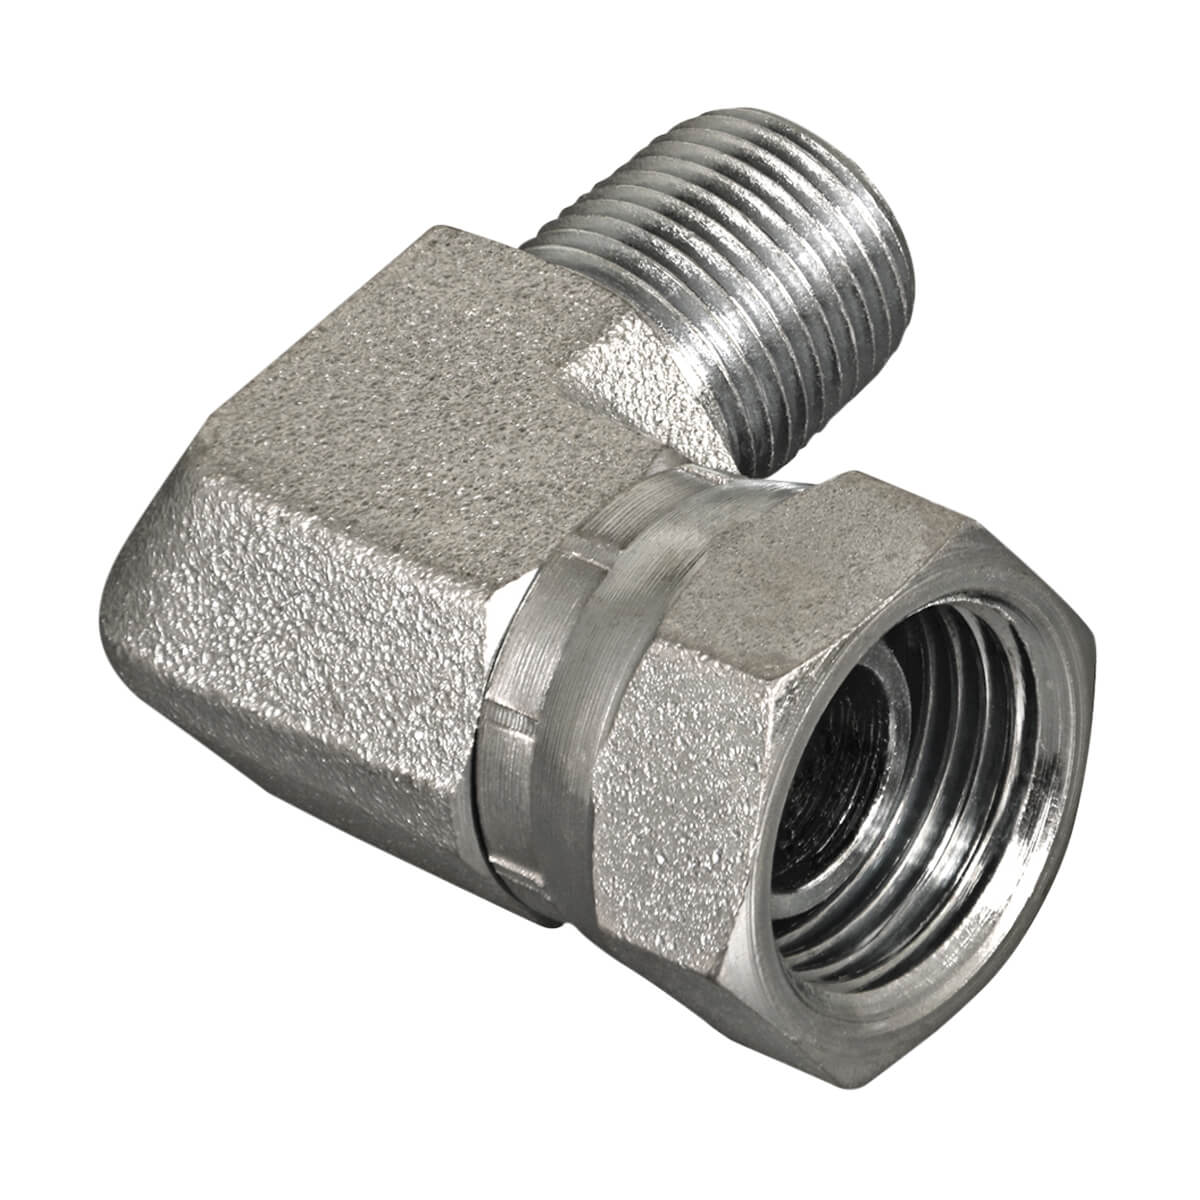 Swivel Hydraulic Adapter - 1/2-in MPT x 1/4-in FPT 90 Degree